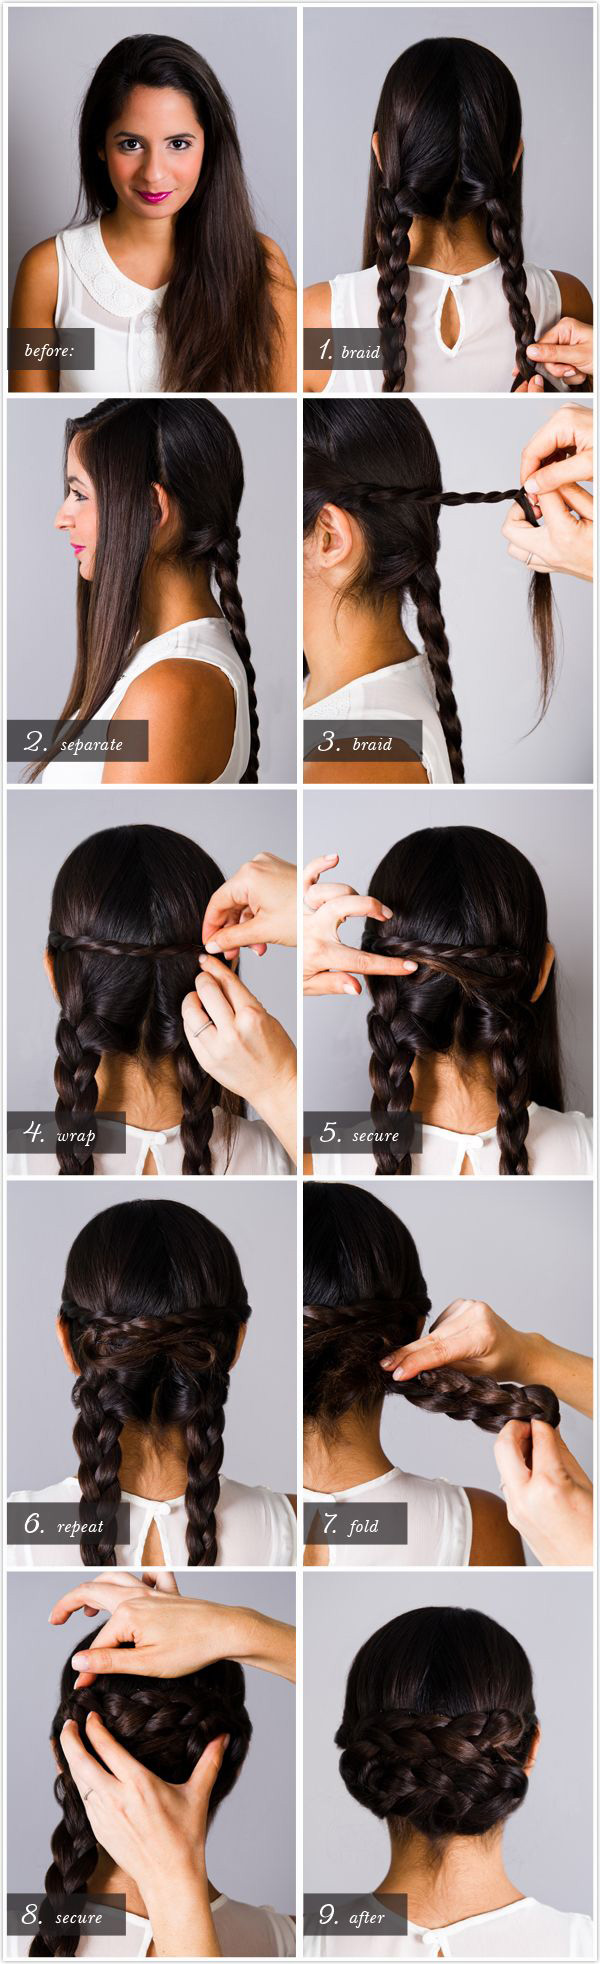 The 23 Best Hairstyles for Greasy Hair—Photos and Ideas | Glamour